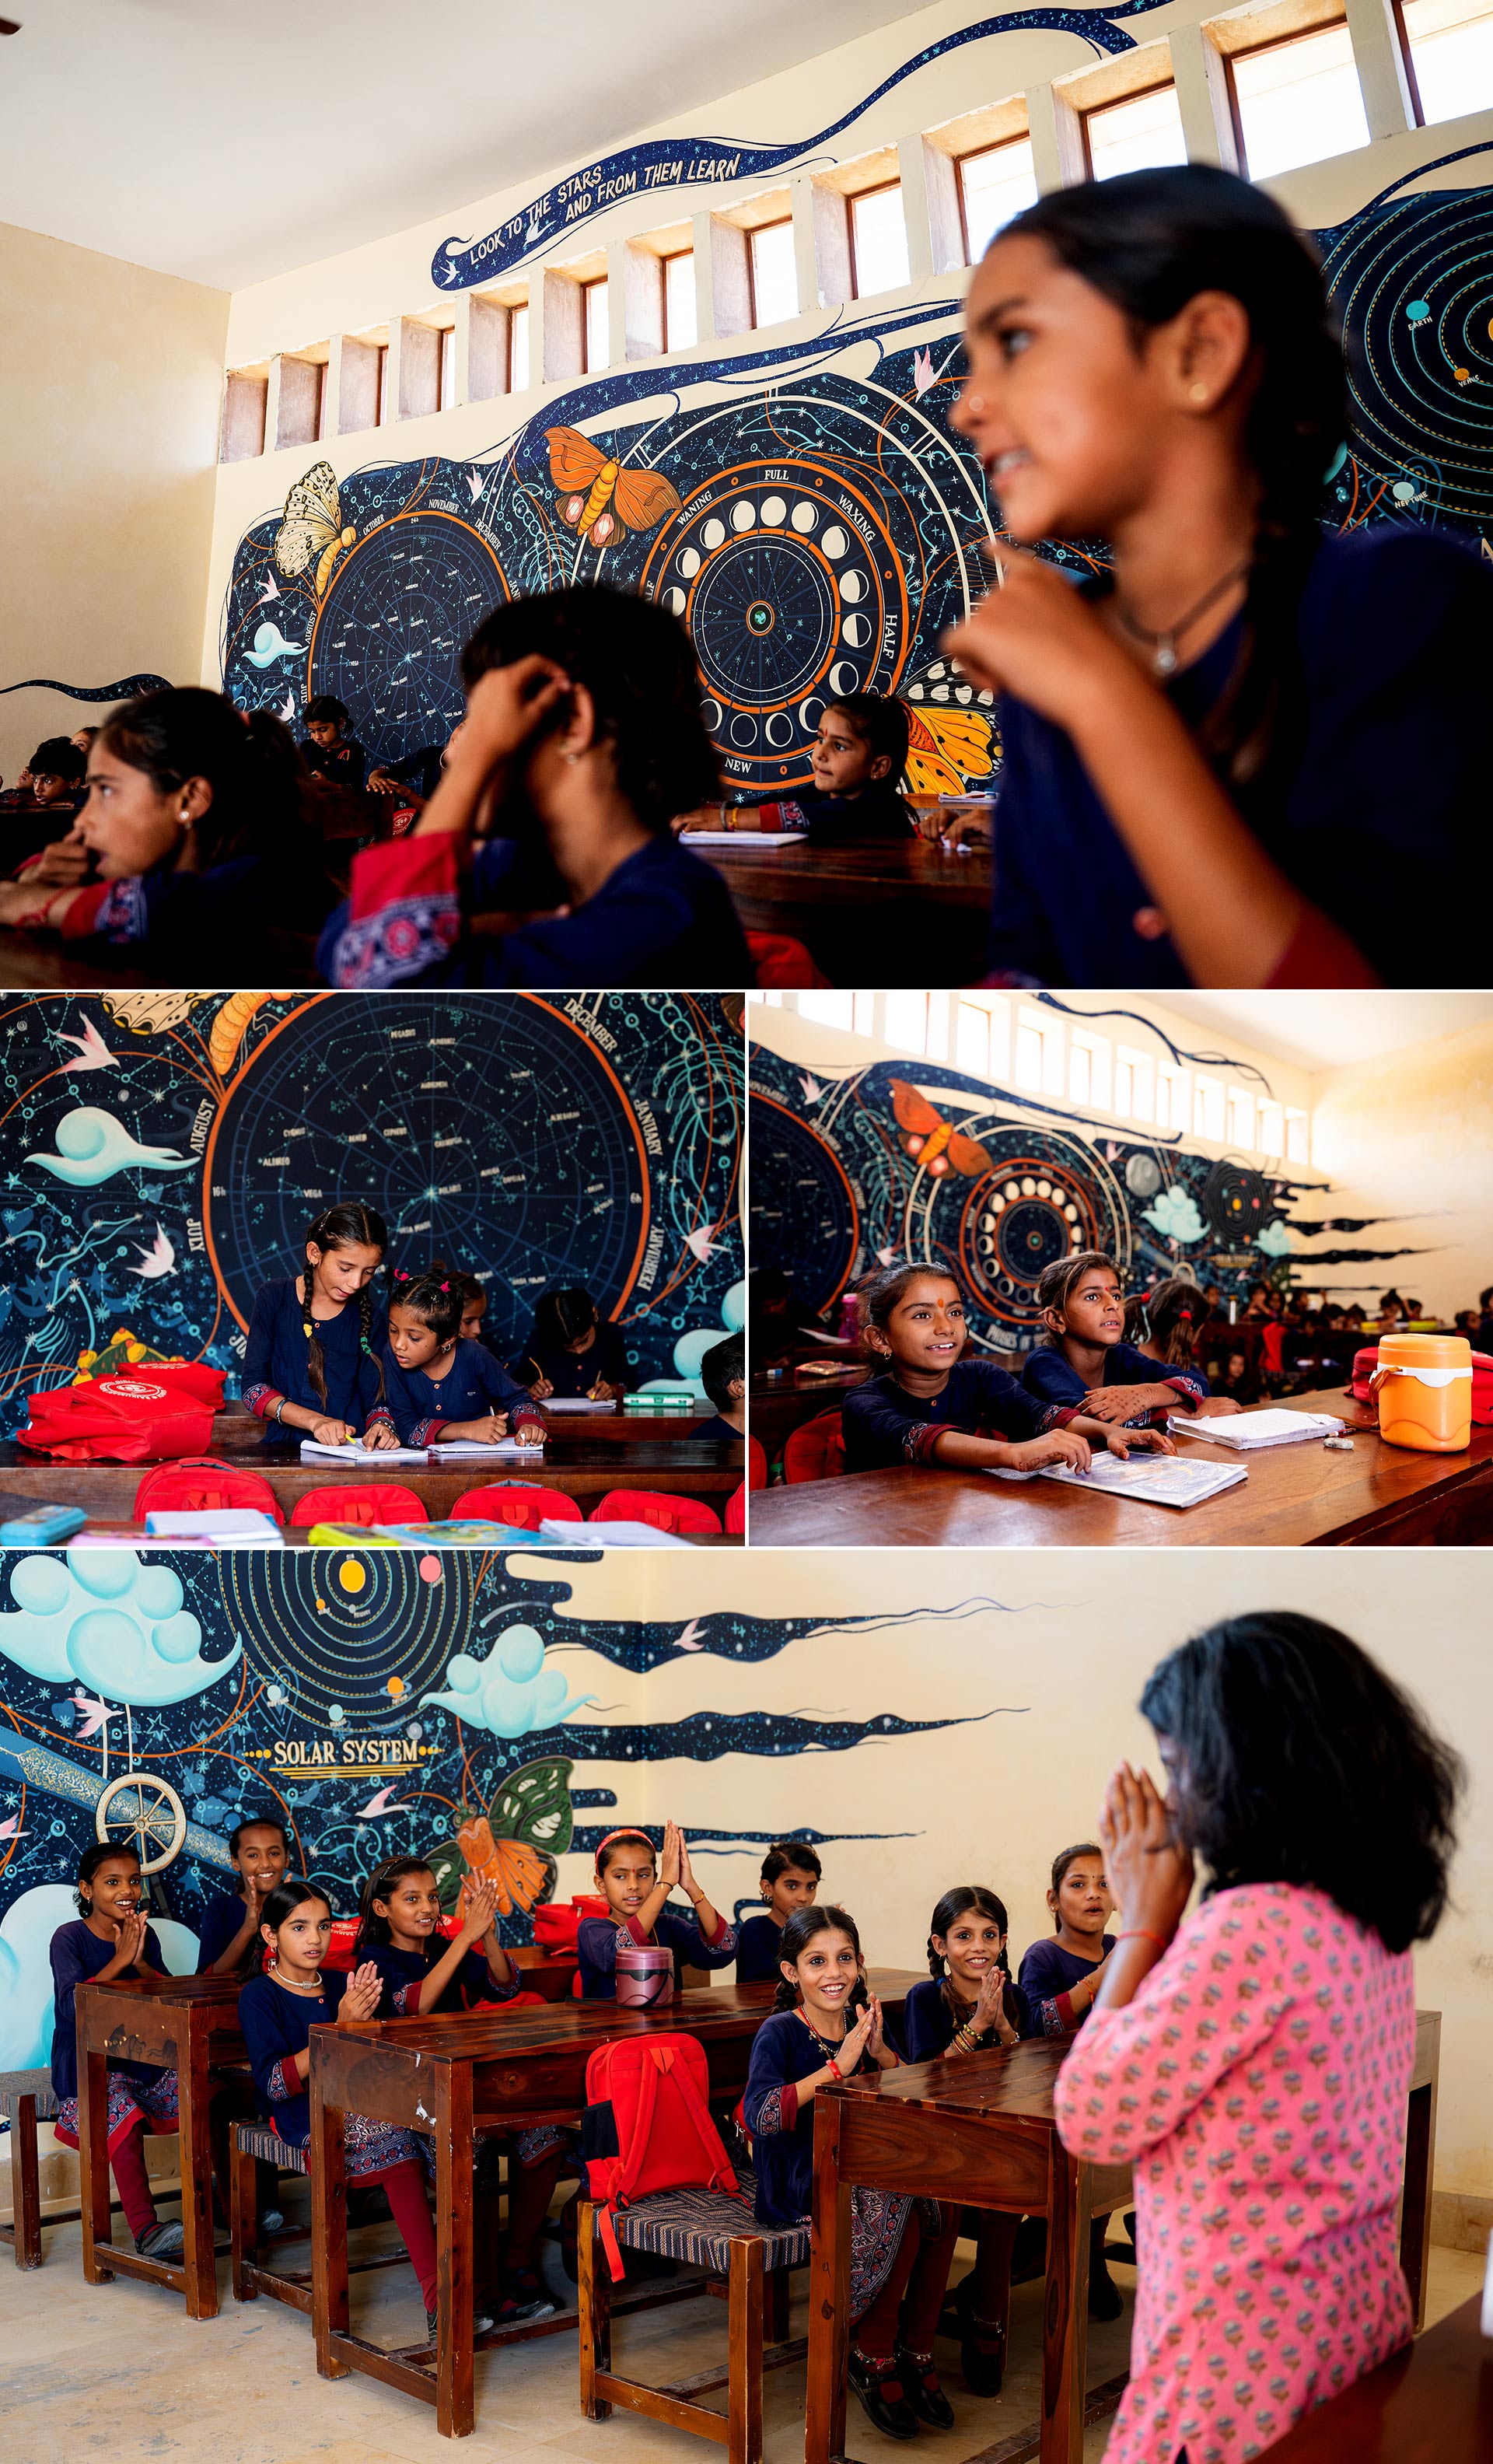 Igniting learning and empowerment through art